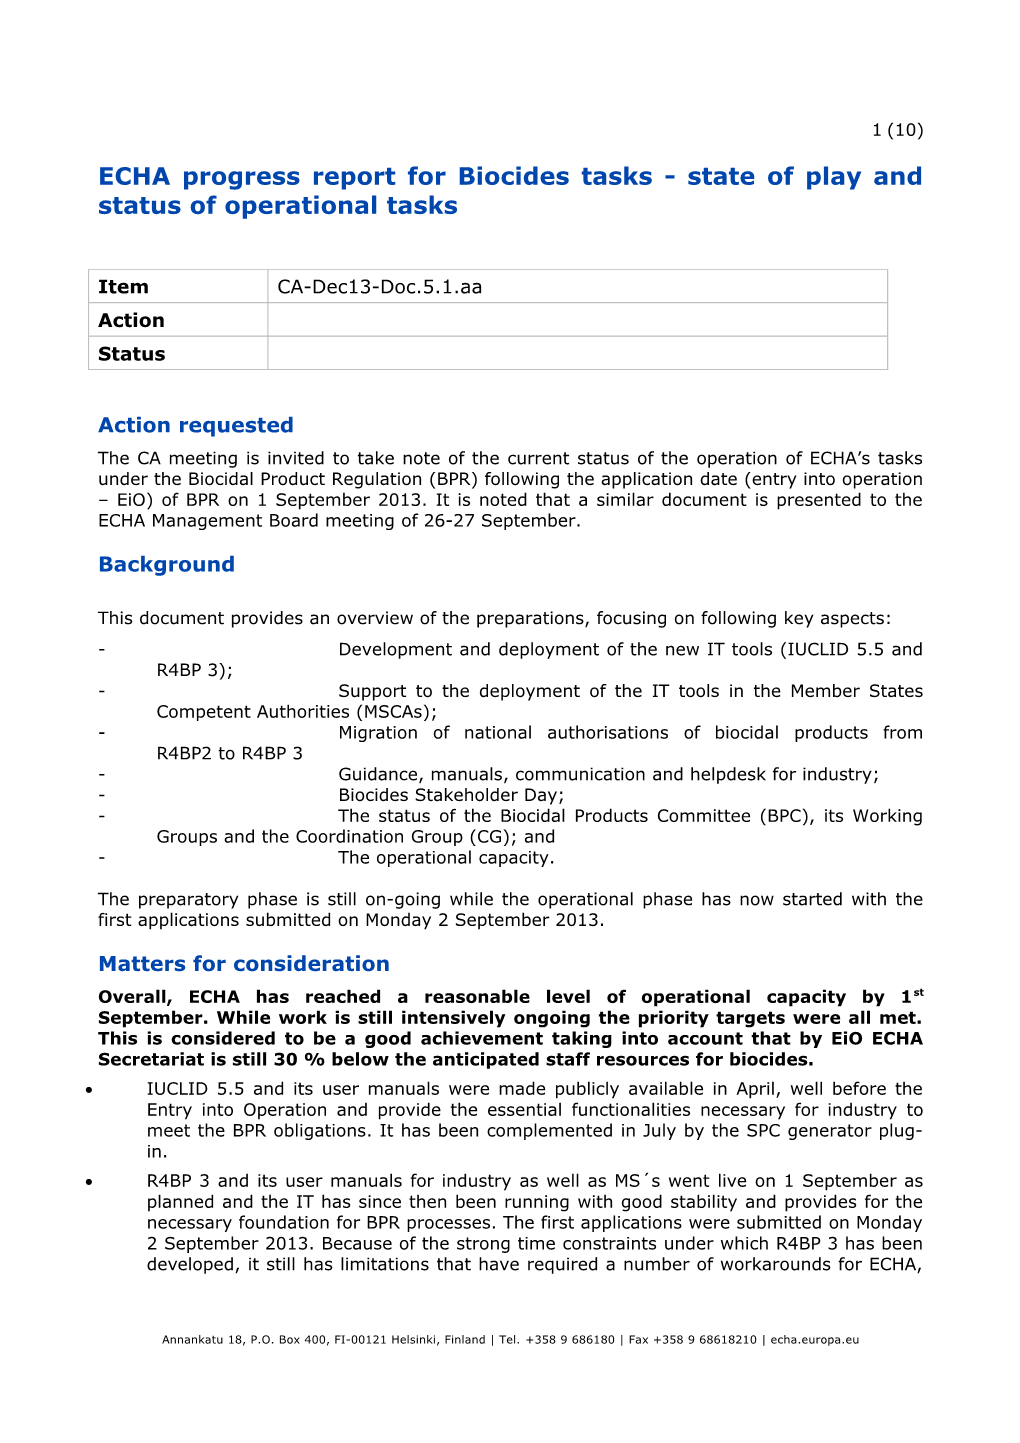 ECHA Progress Report for Biocides Tasks - State of Play and Status of Operational Tasks